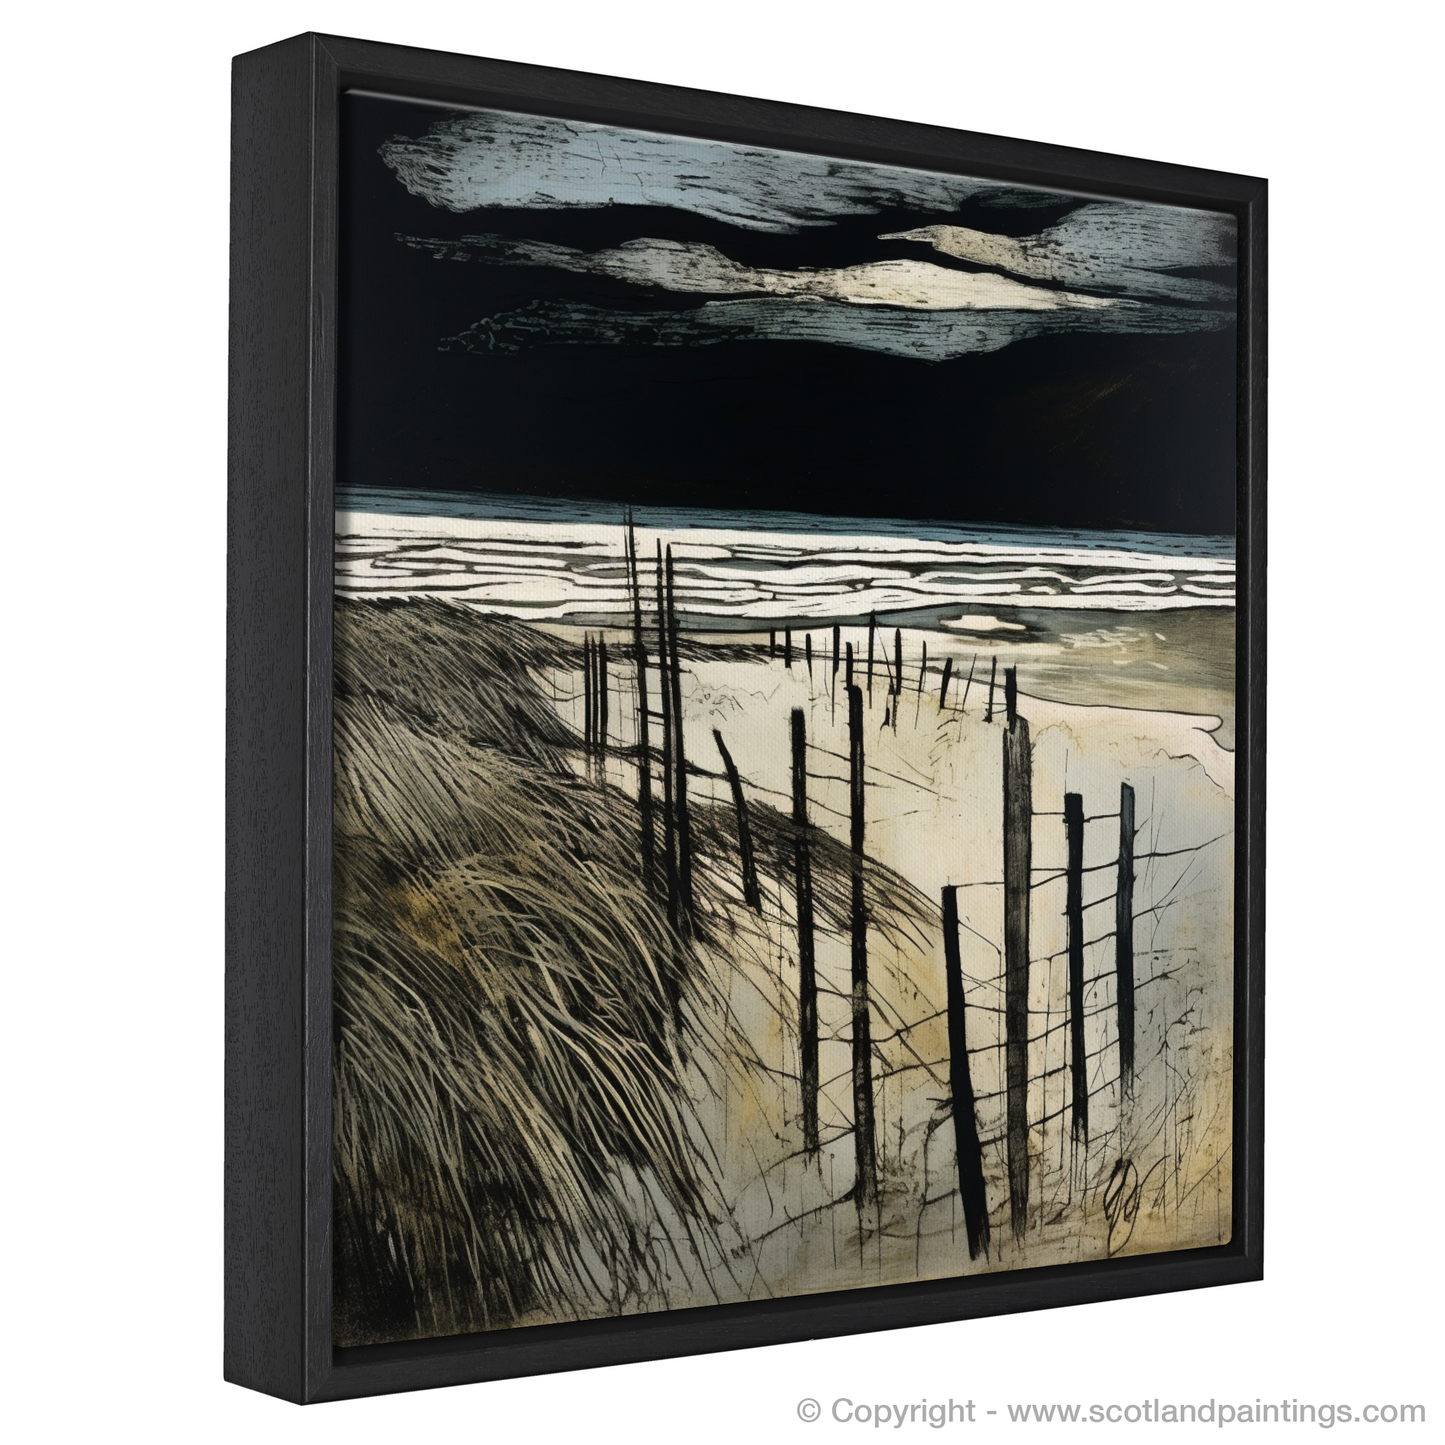 Painting and Art Print of West Sands with a stormy sky entitled "Stormy Serenade at West Sands".